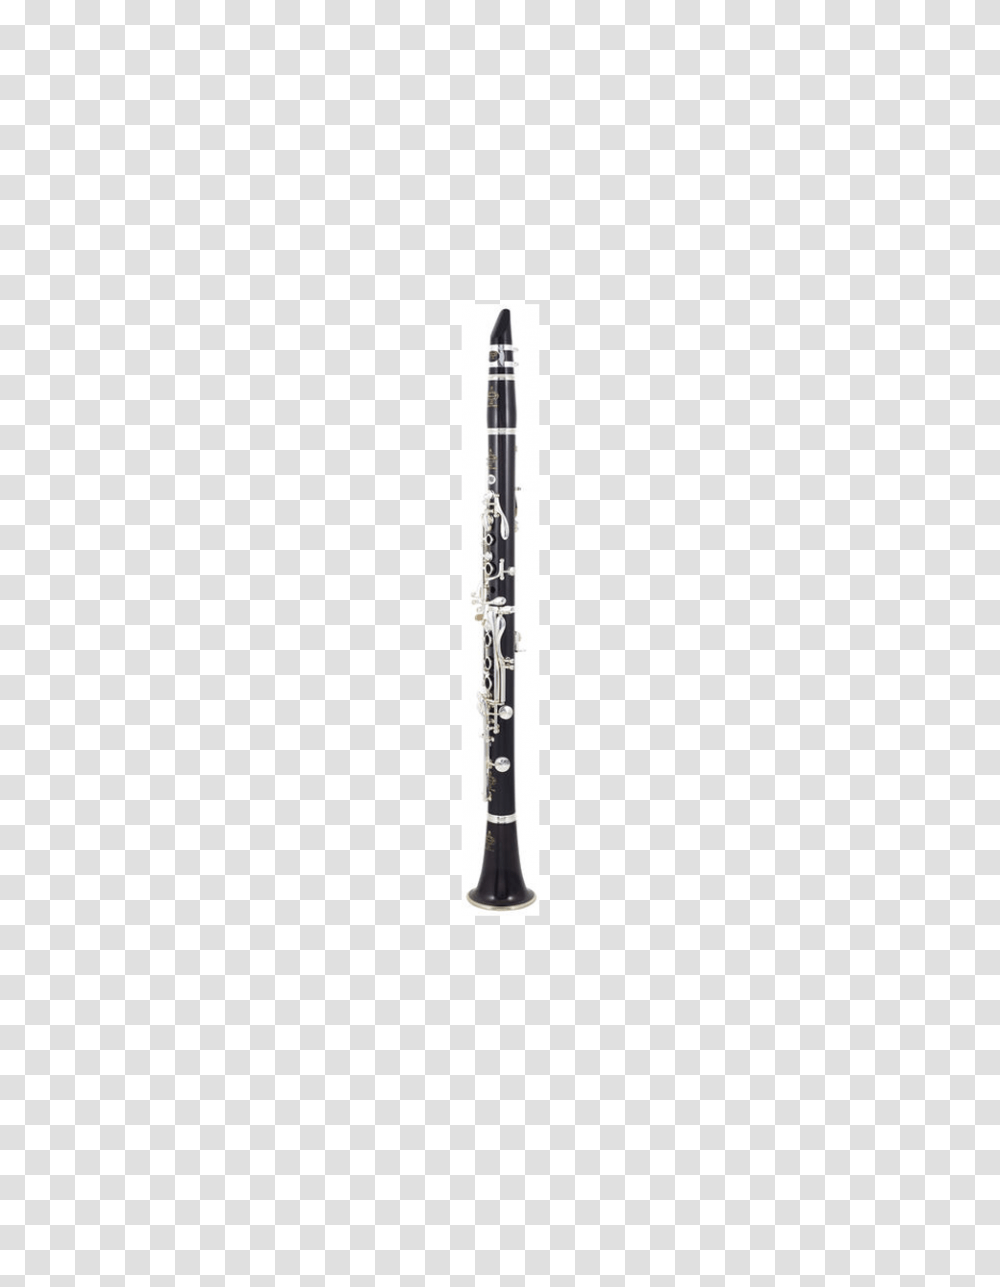 Buffet Crampon Rc Bb Clarinet, Musical Instrument, Oboe Transparent Png